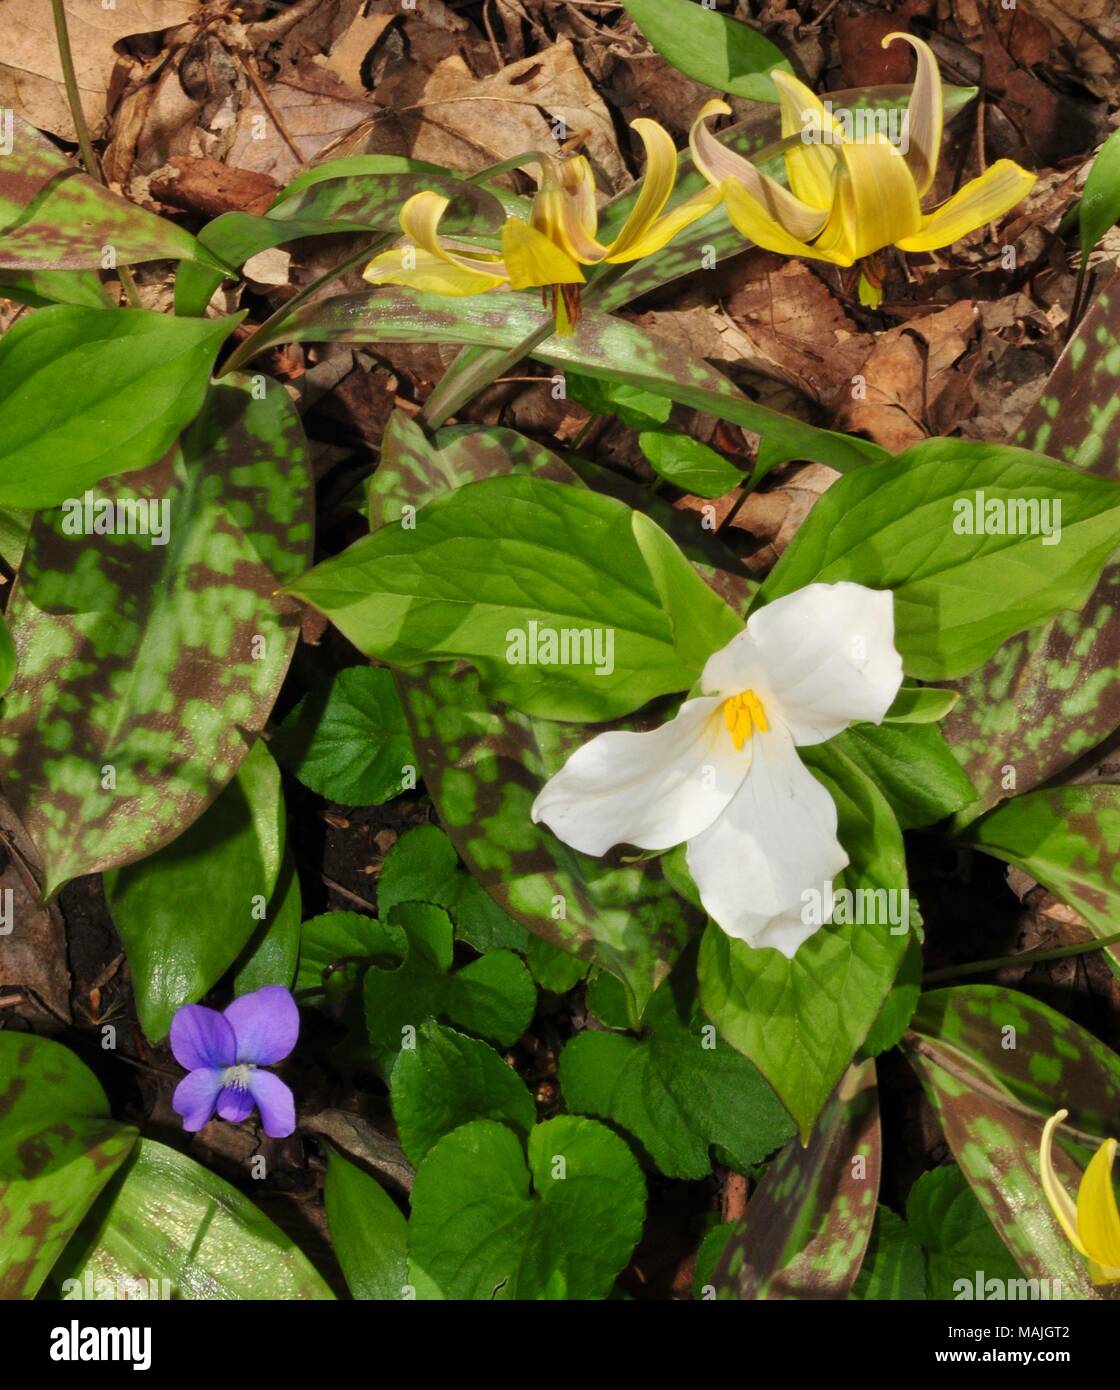 Beautiful assortment of spring wildflowers including large white trillium, trout lily and blue violet. Stock Photo